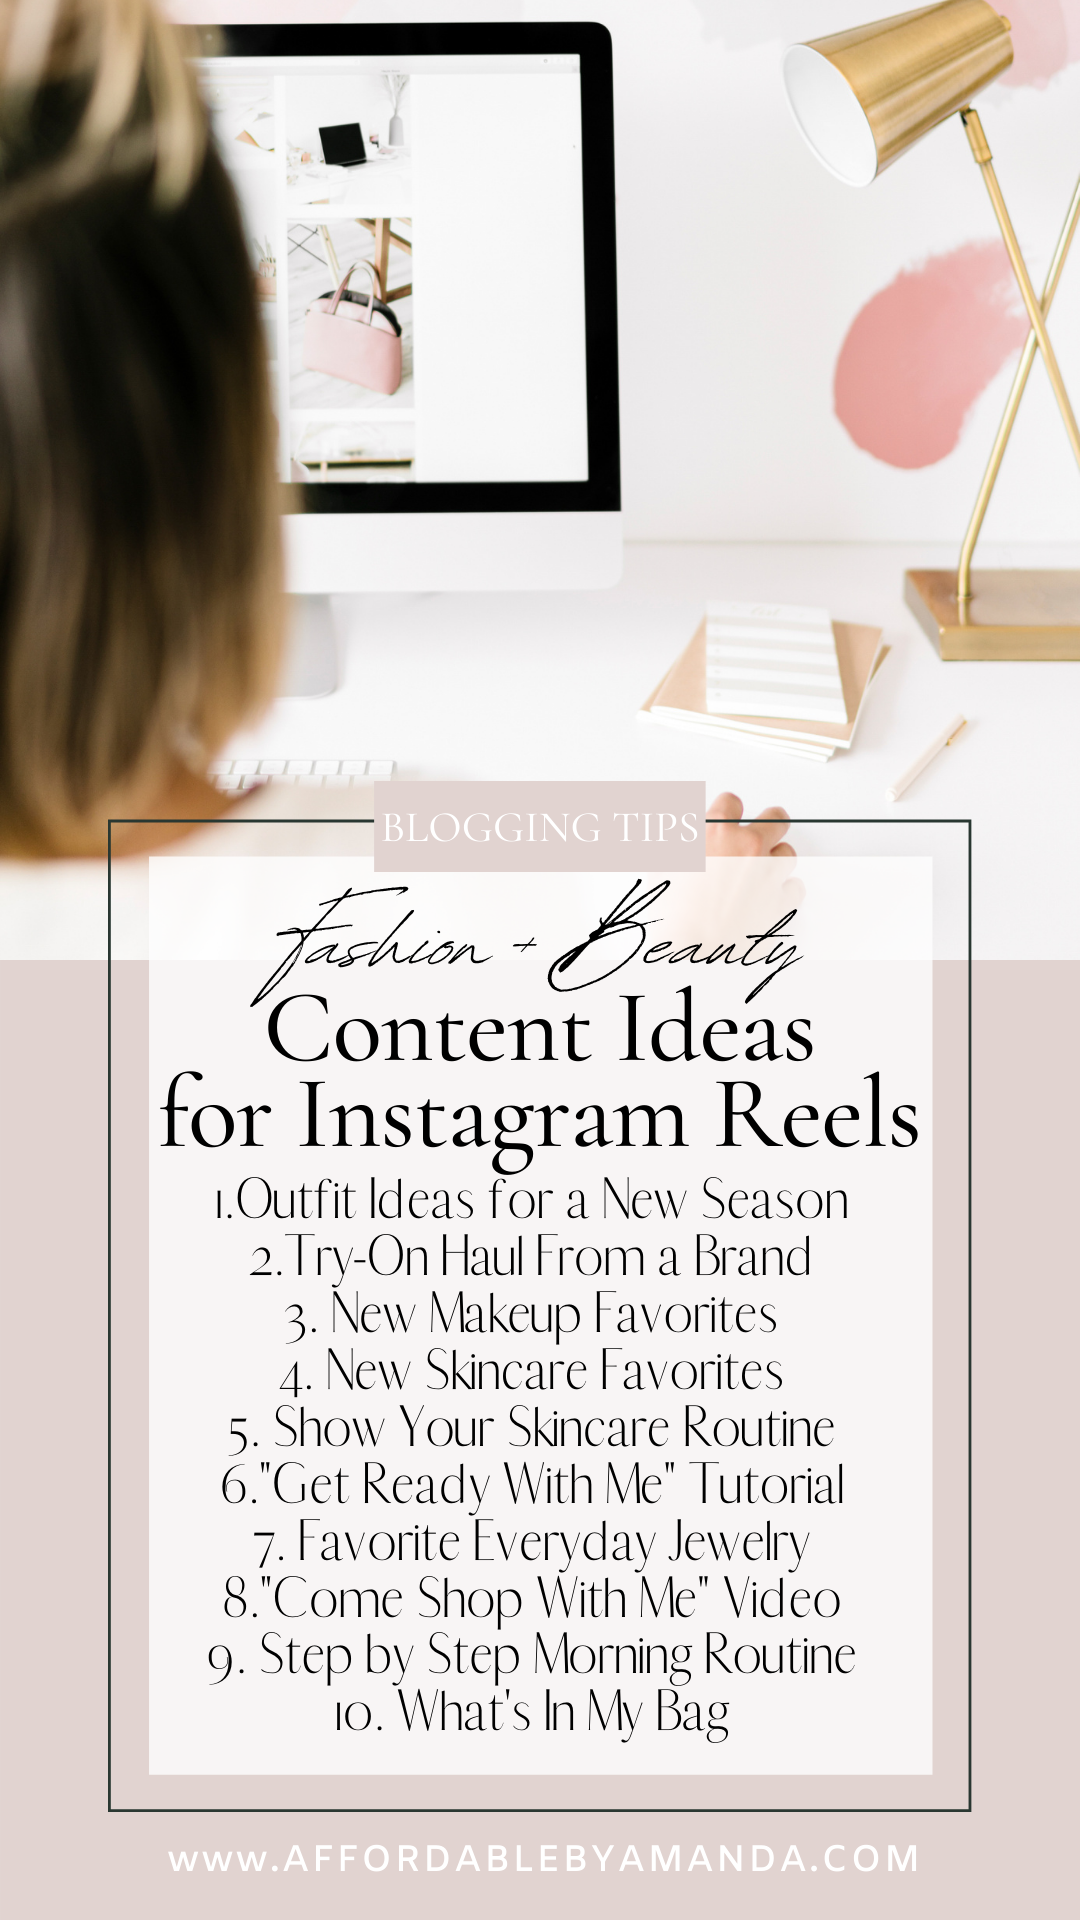 Instagram Reels Ideas for Fashion/Beauty Content Creators - Affordable by Amanda